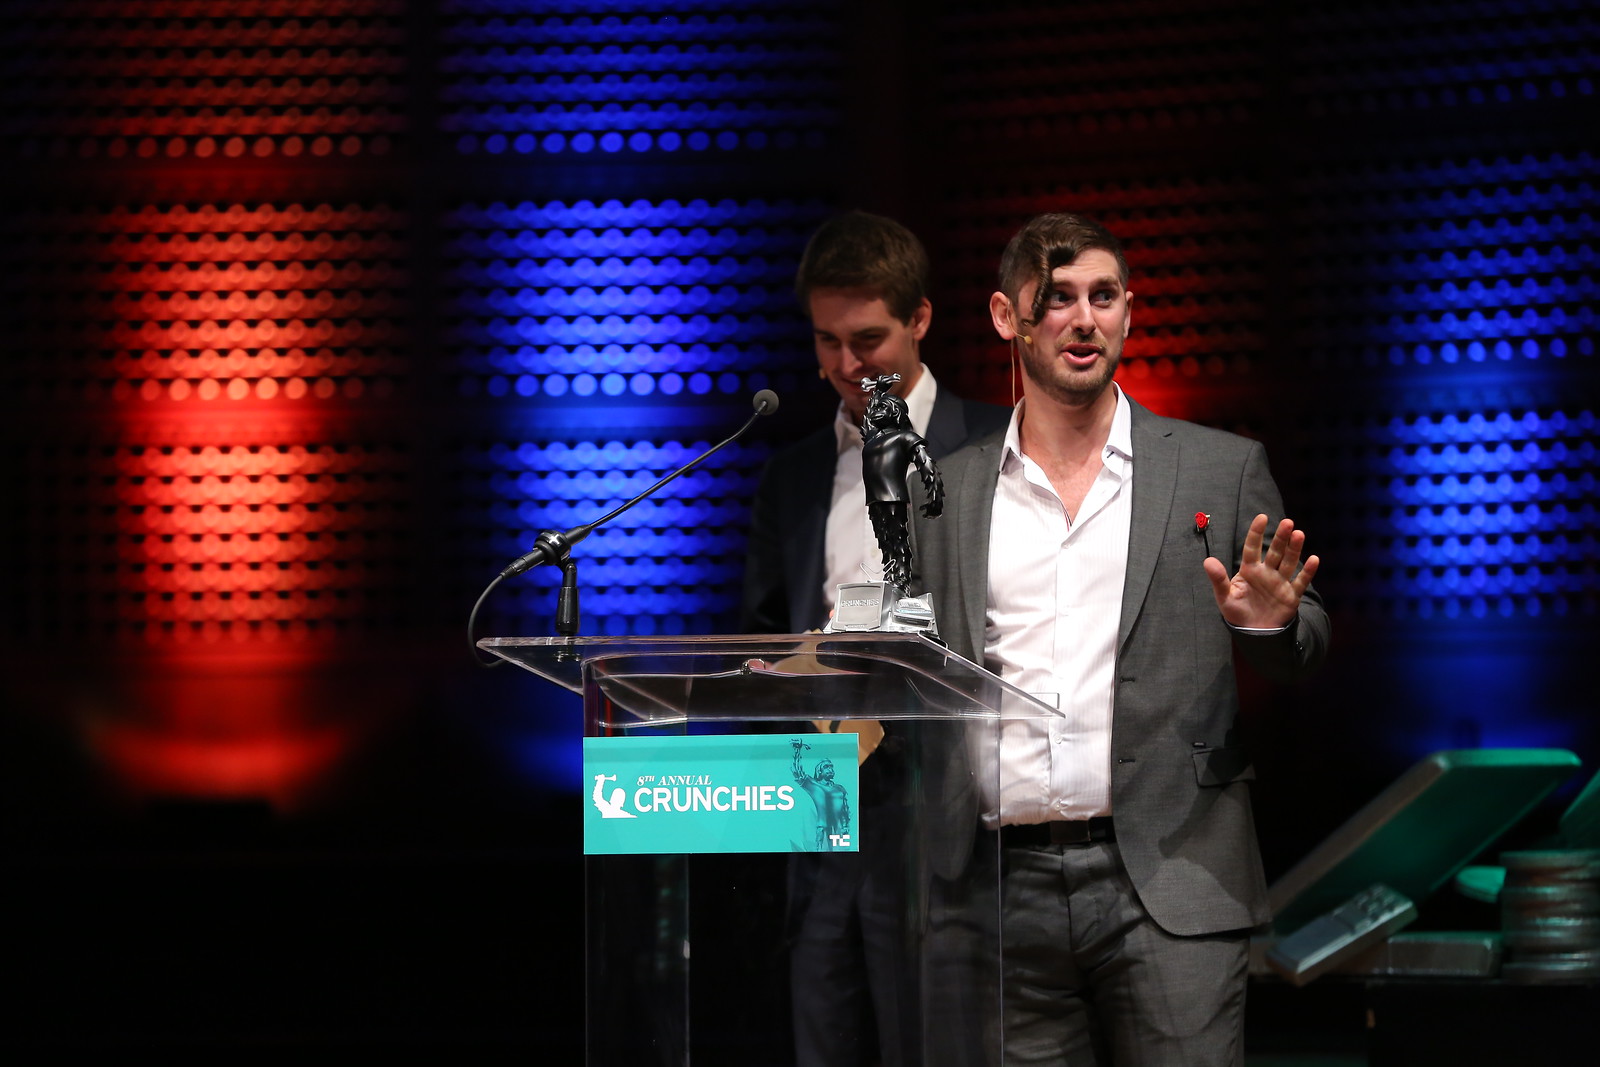 TechCrunch's Josh Constantine and SnapChat CEO Evan Spiegel present an award at the Crunchies.